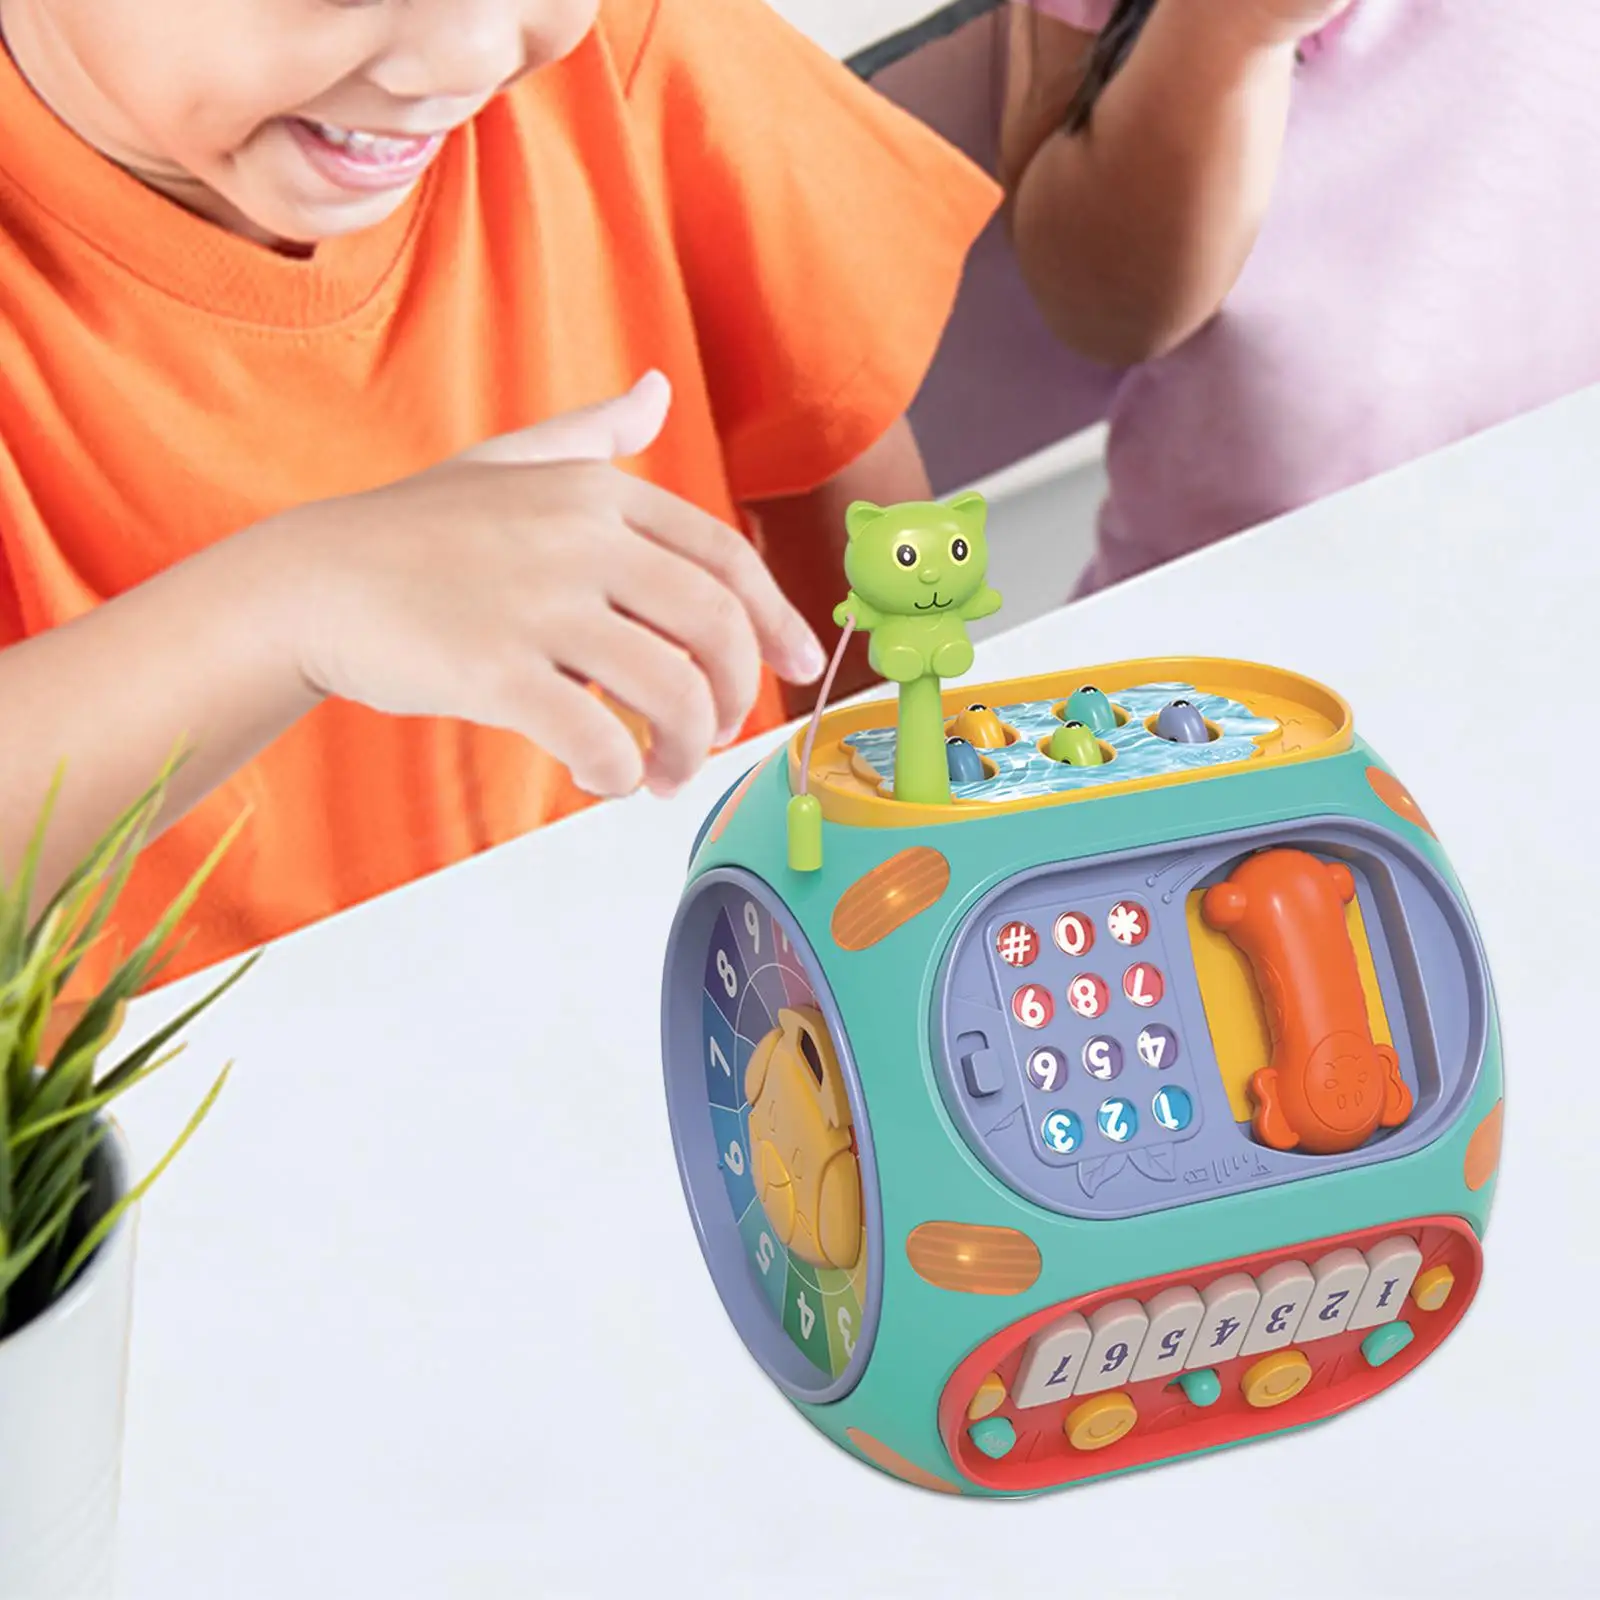 Light Sound Musical Cube Baby Activity Cube for Gifts Observation Fine Motor